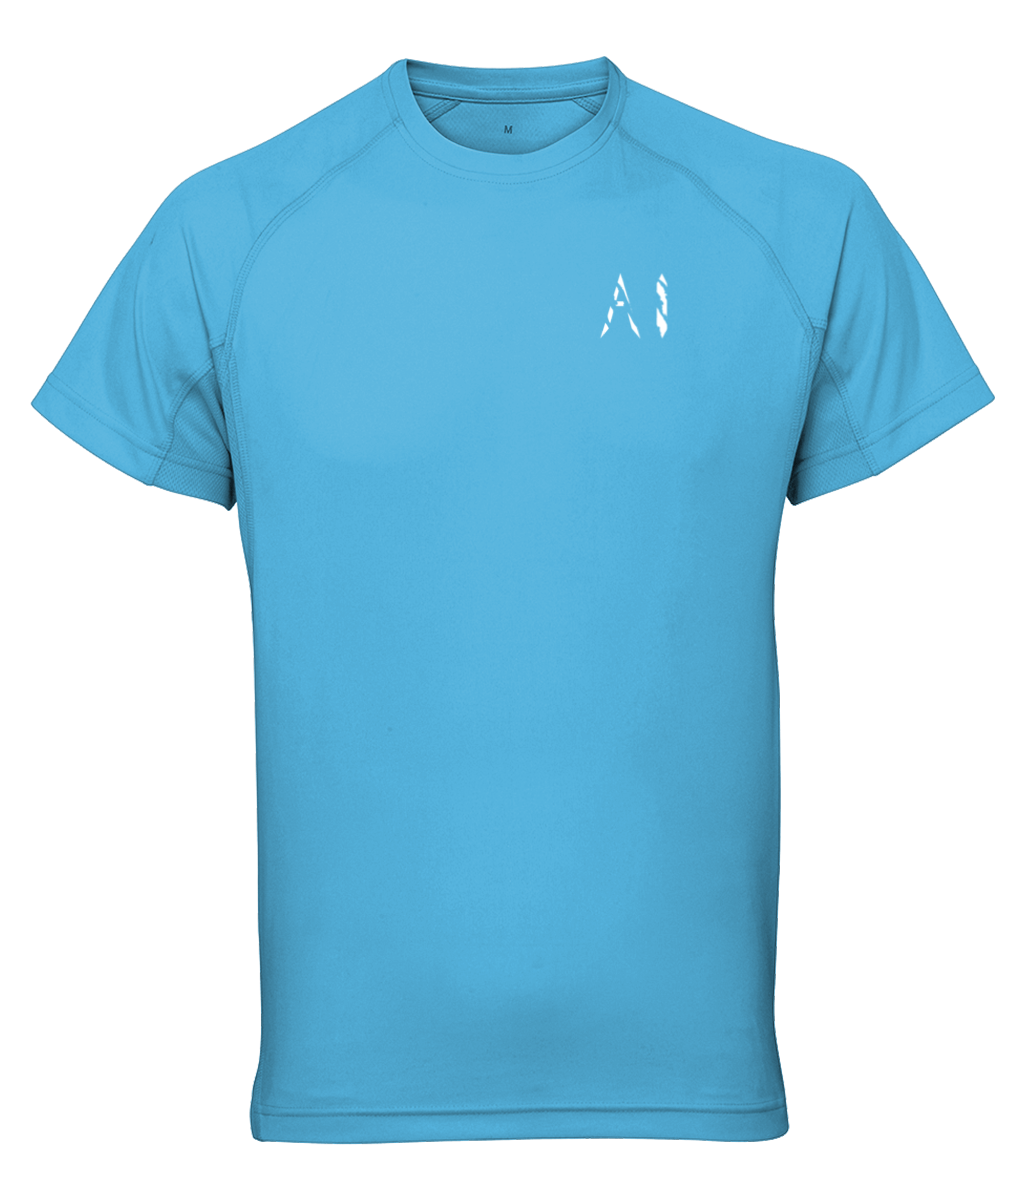 Mens light blue Athletic Performance Top with White AI logo on the left chest